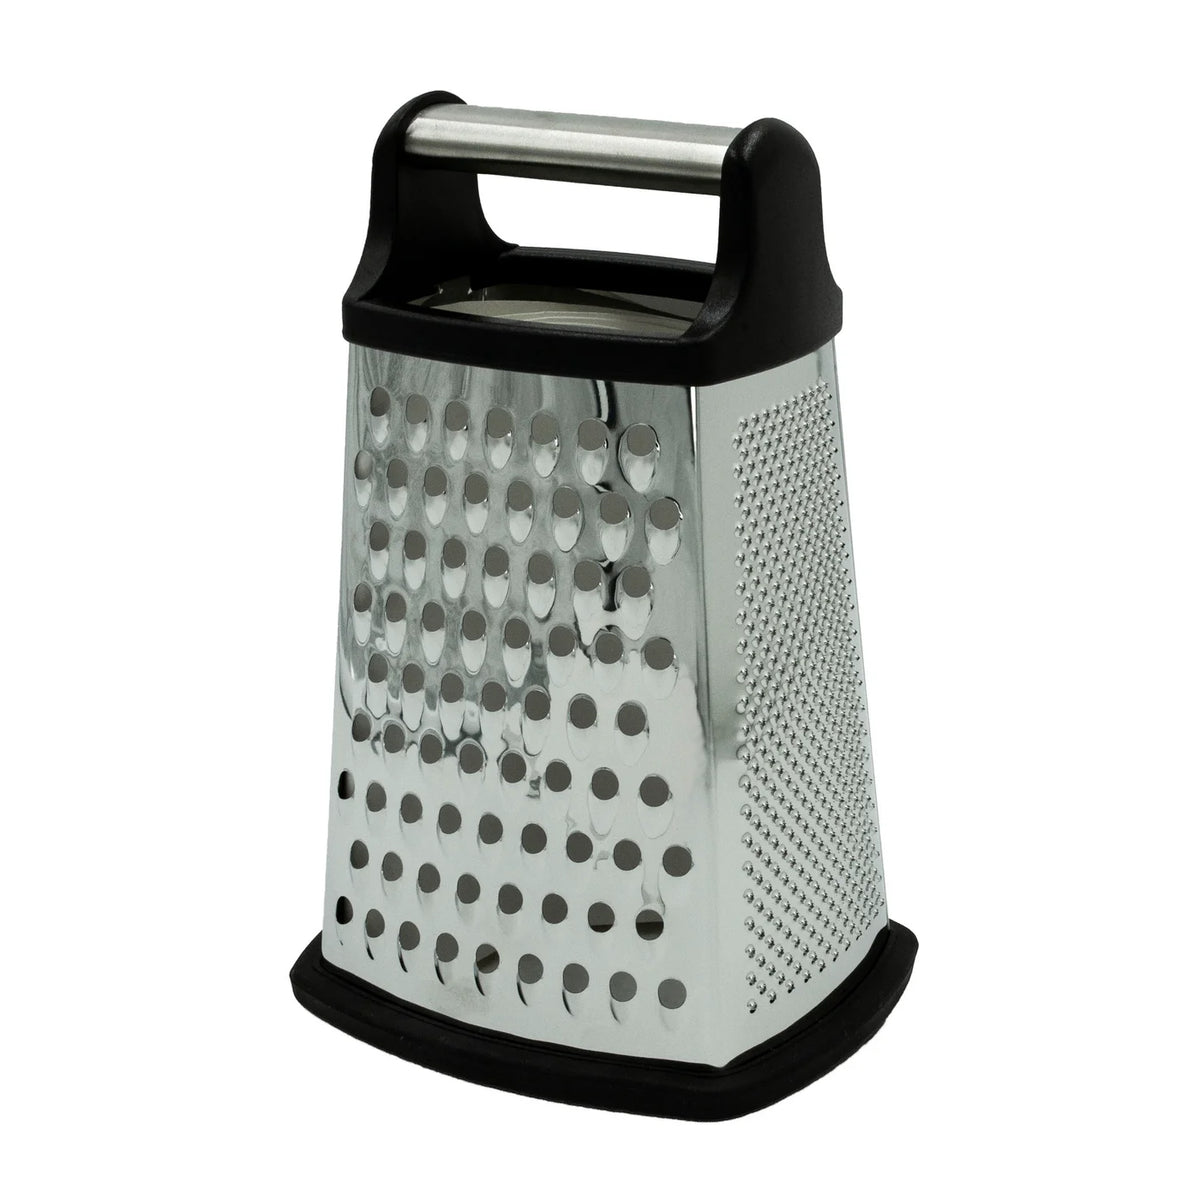 Grater - Stainless Steel Box